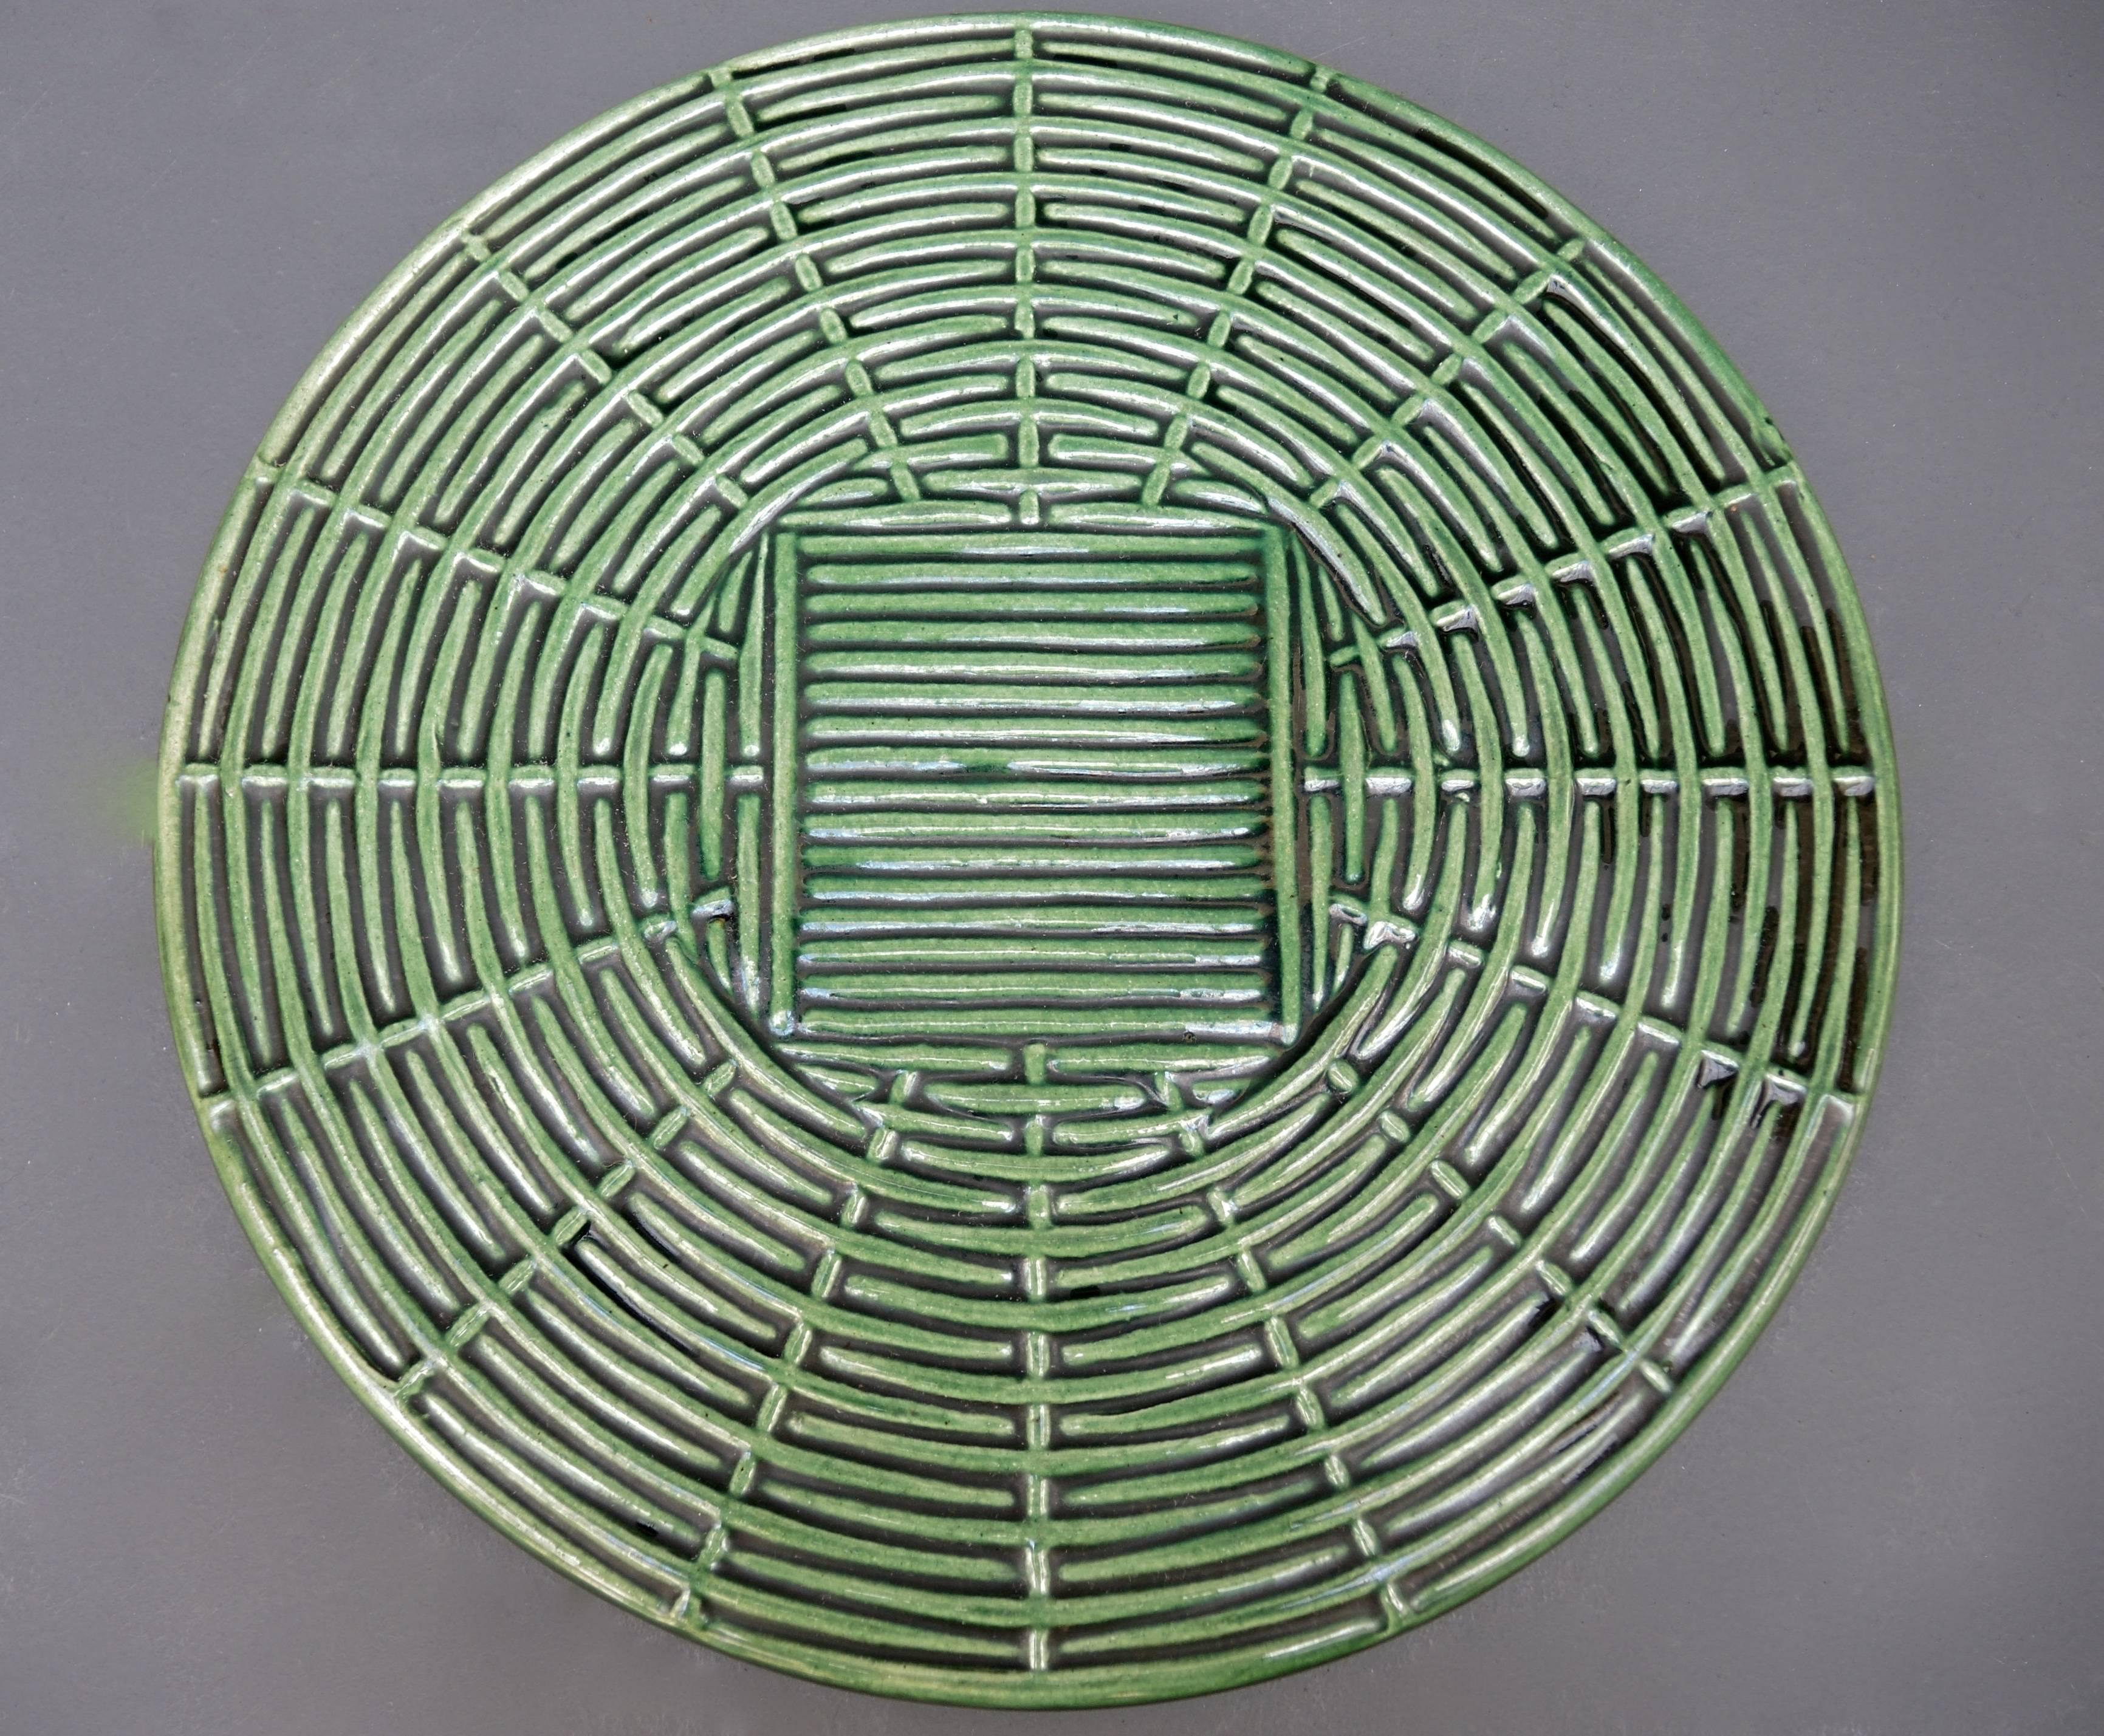 Beautiful woven form cheese or tart serving plate. Made of green tin glazed earthenware.
Decorative ceramic serving pieces are made by slip casting earthenware into a plaster mold. After several castings the details of the mold are lessened and